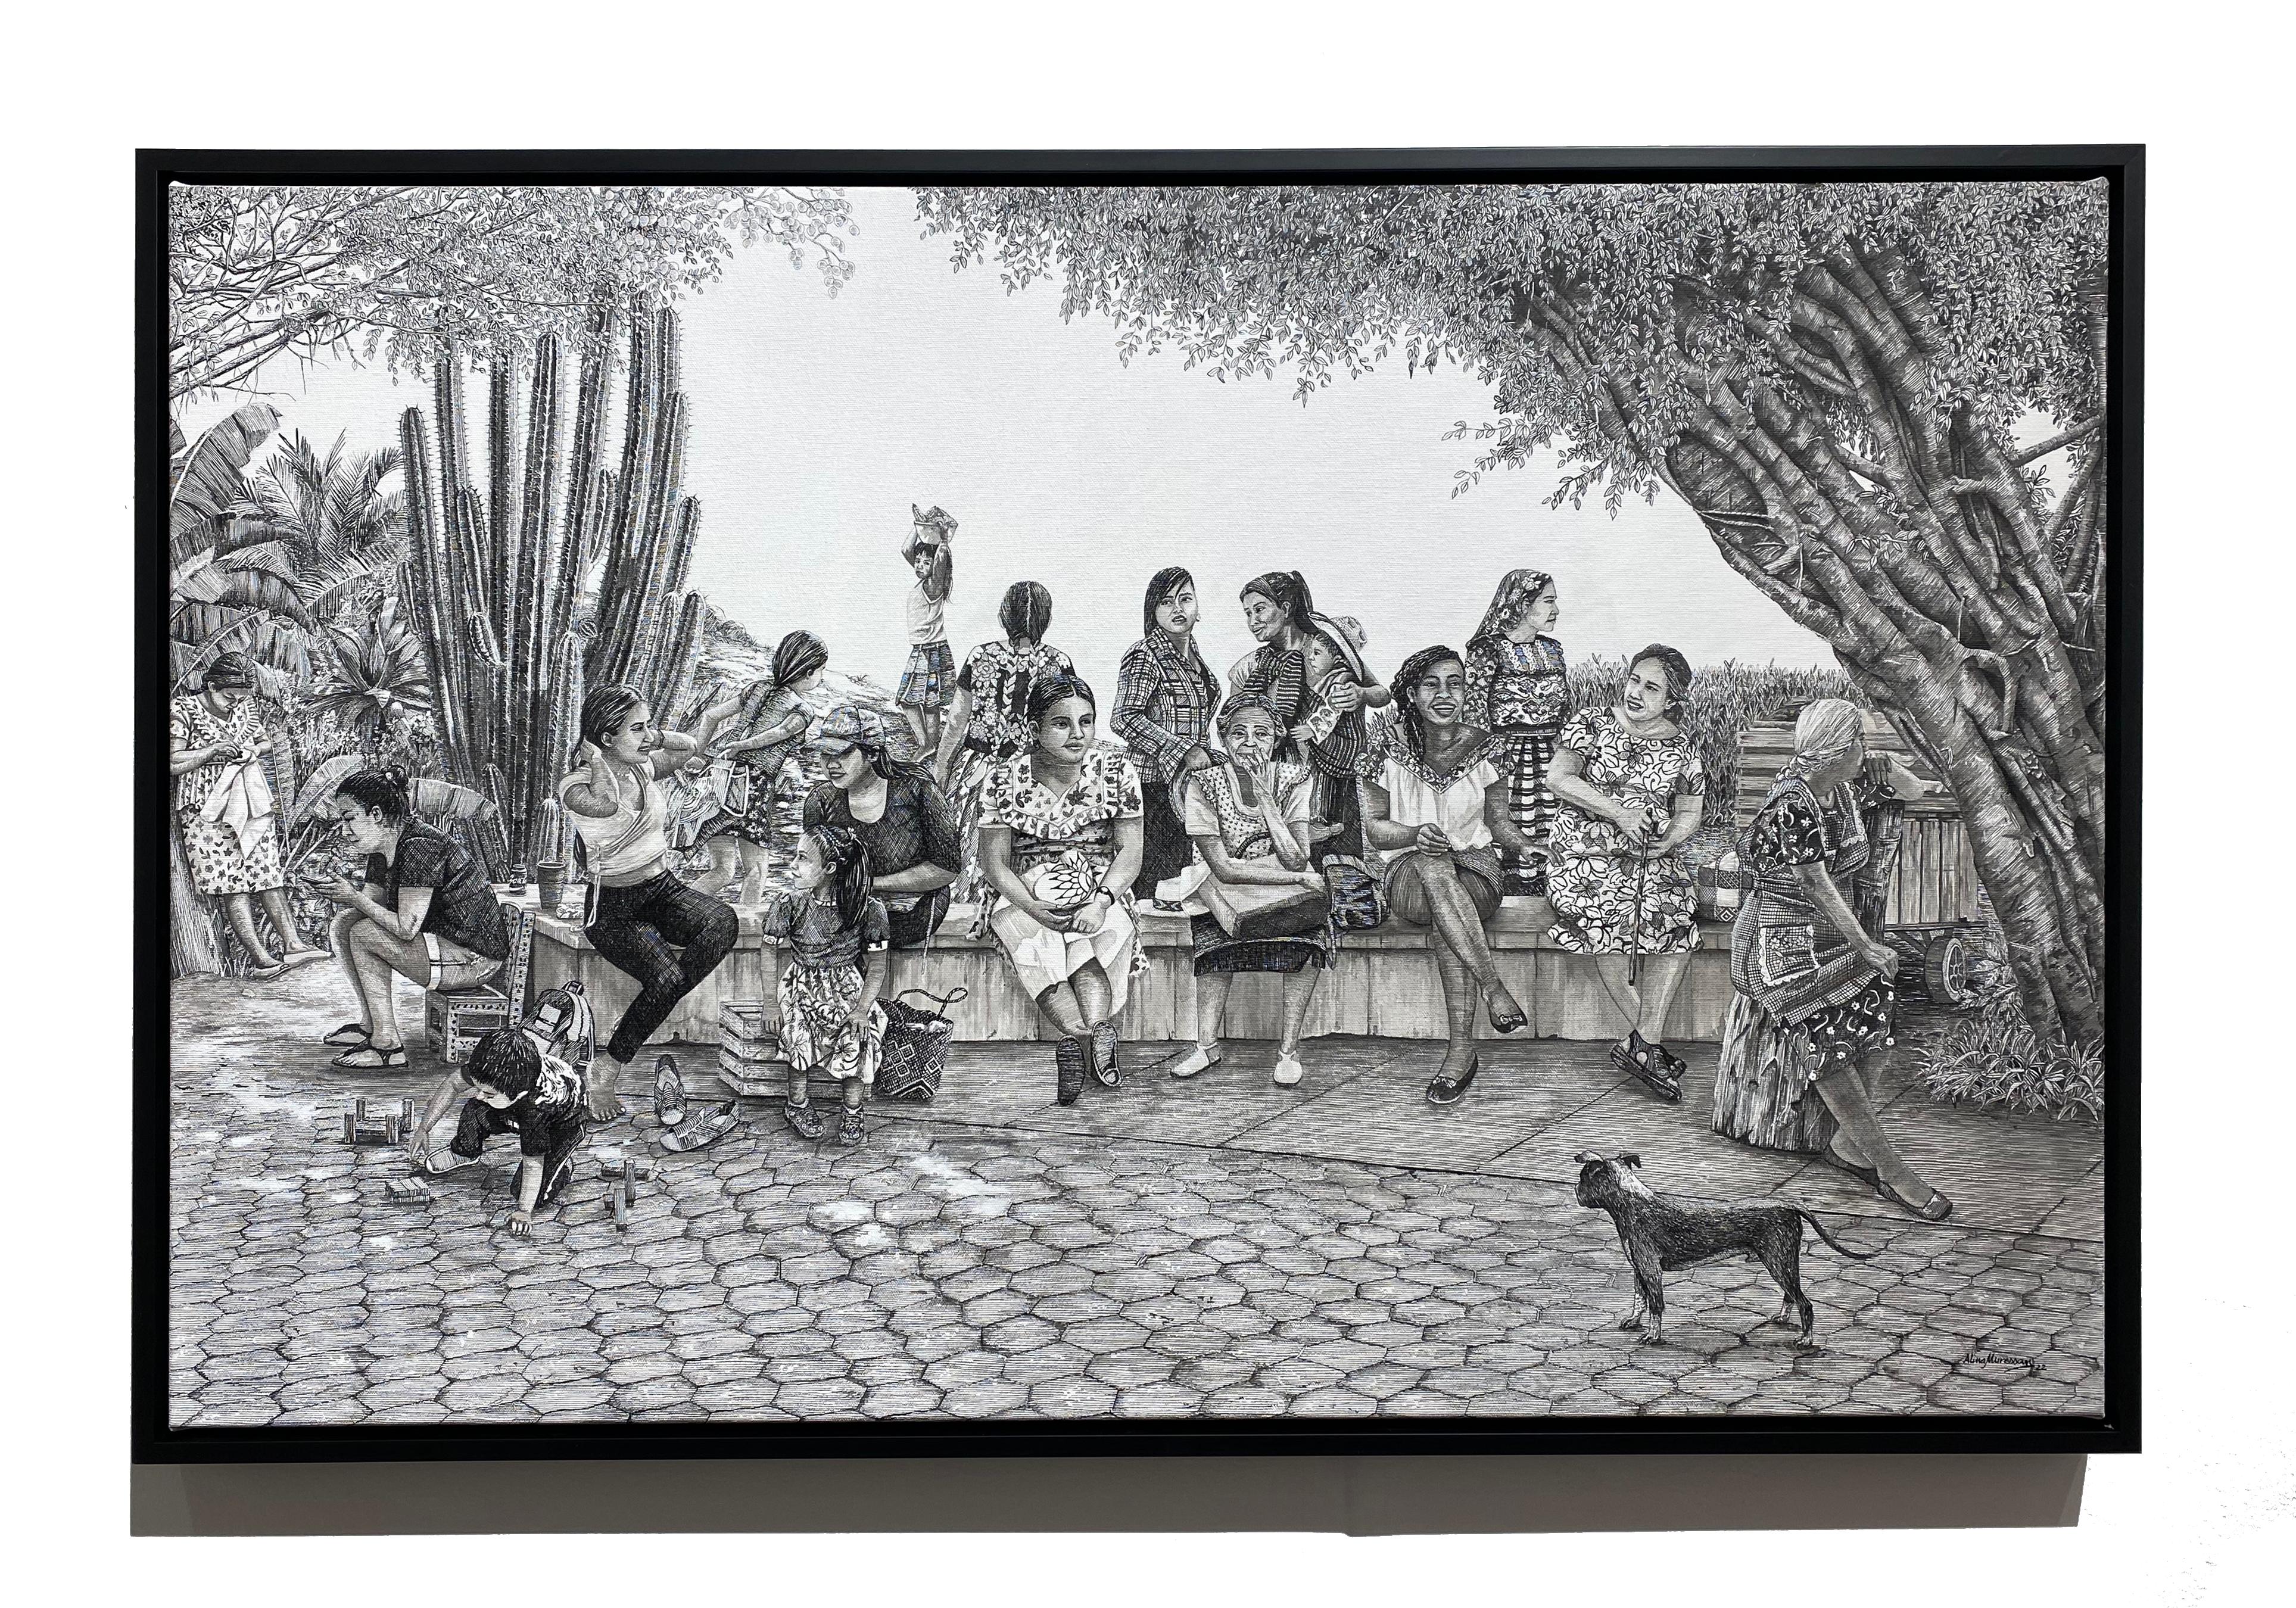 Mujeres de Oaxaca - Women of Oaxaca - contemporary ink and brush on canvas - Painting by Alina Muressan